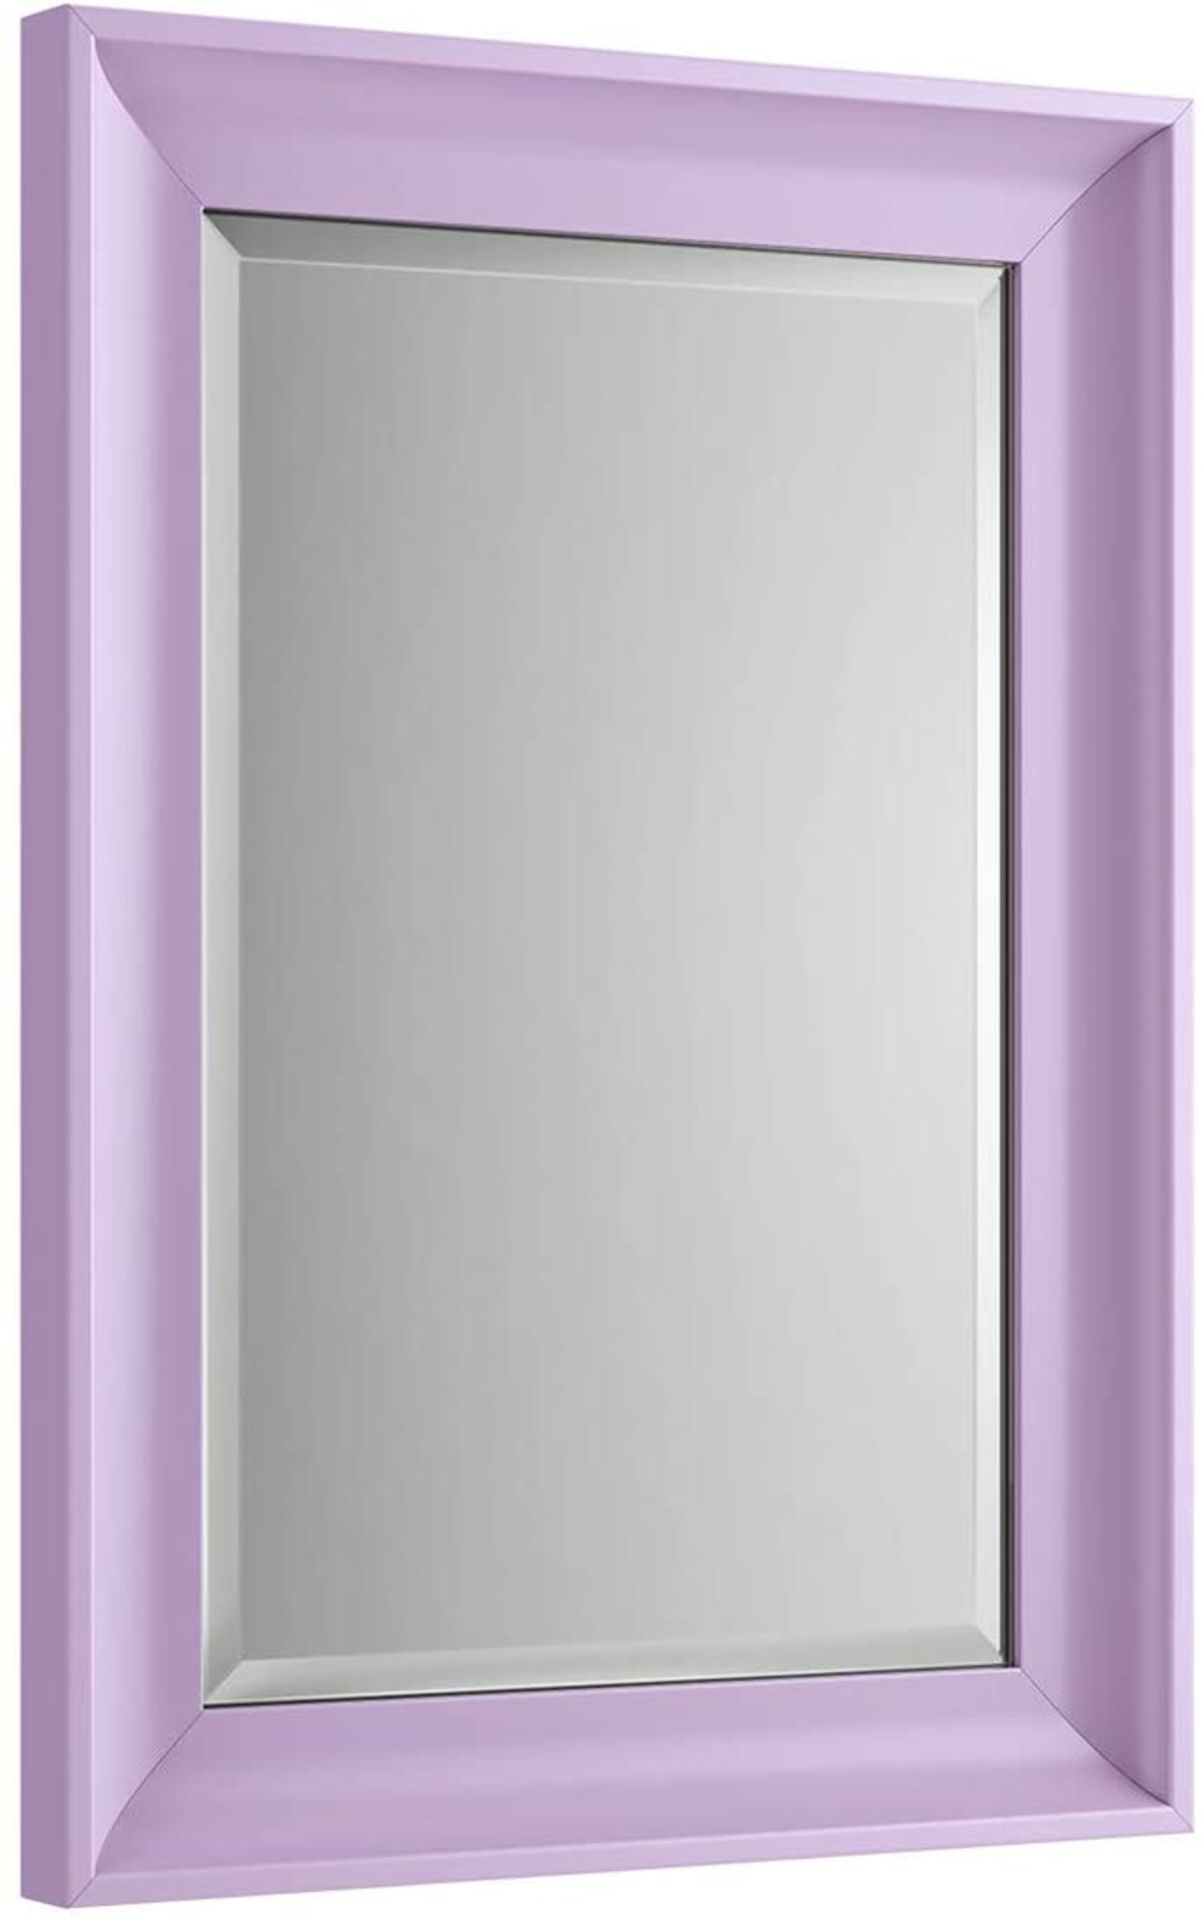 New 700x500mm Melbourne Purple Framed Mirror. RRP £209.99. Ml8019 Adds A Funky, Stylish Look T...